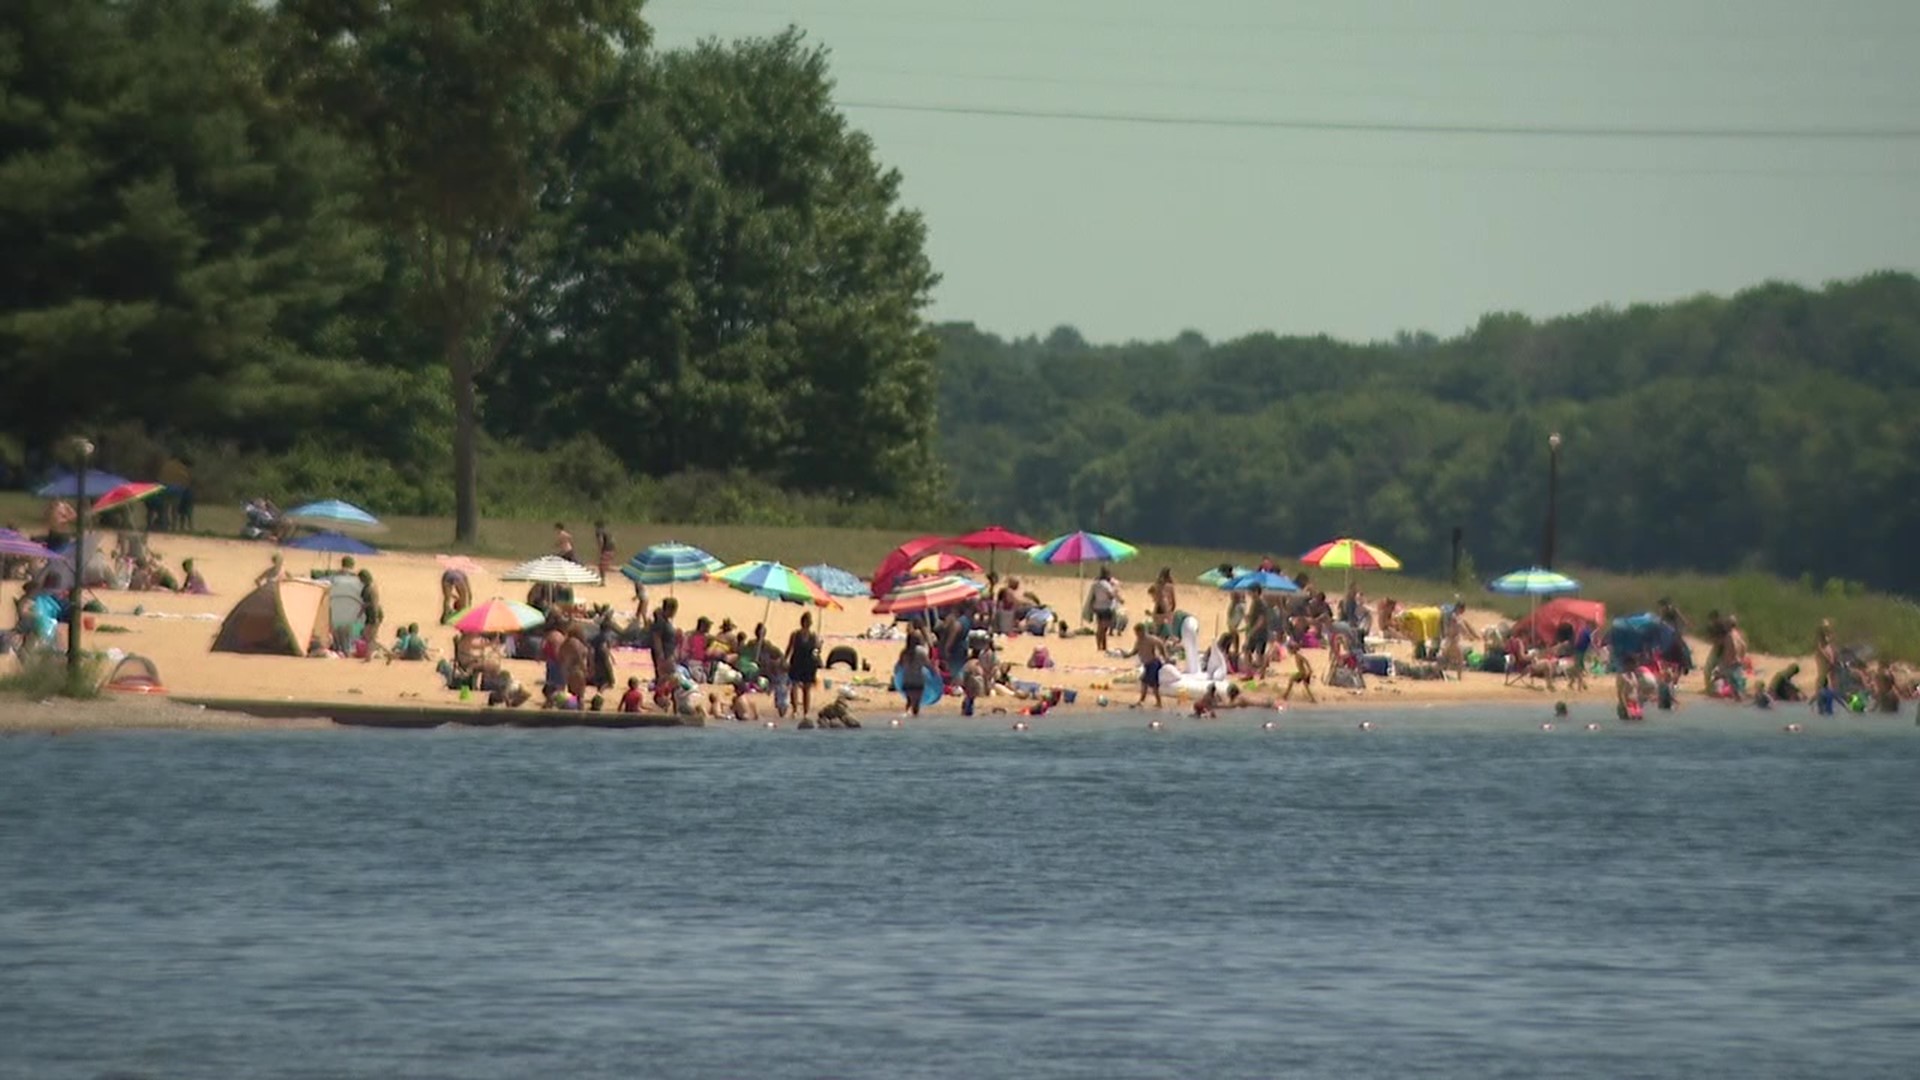 State Representative Calls For Change At Beltzville State Park